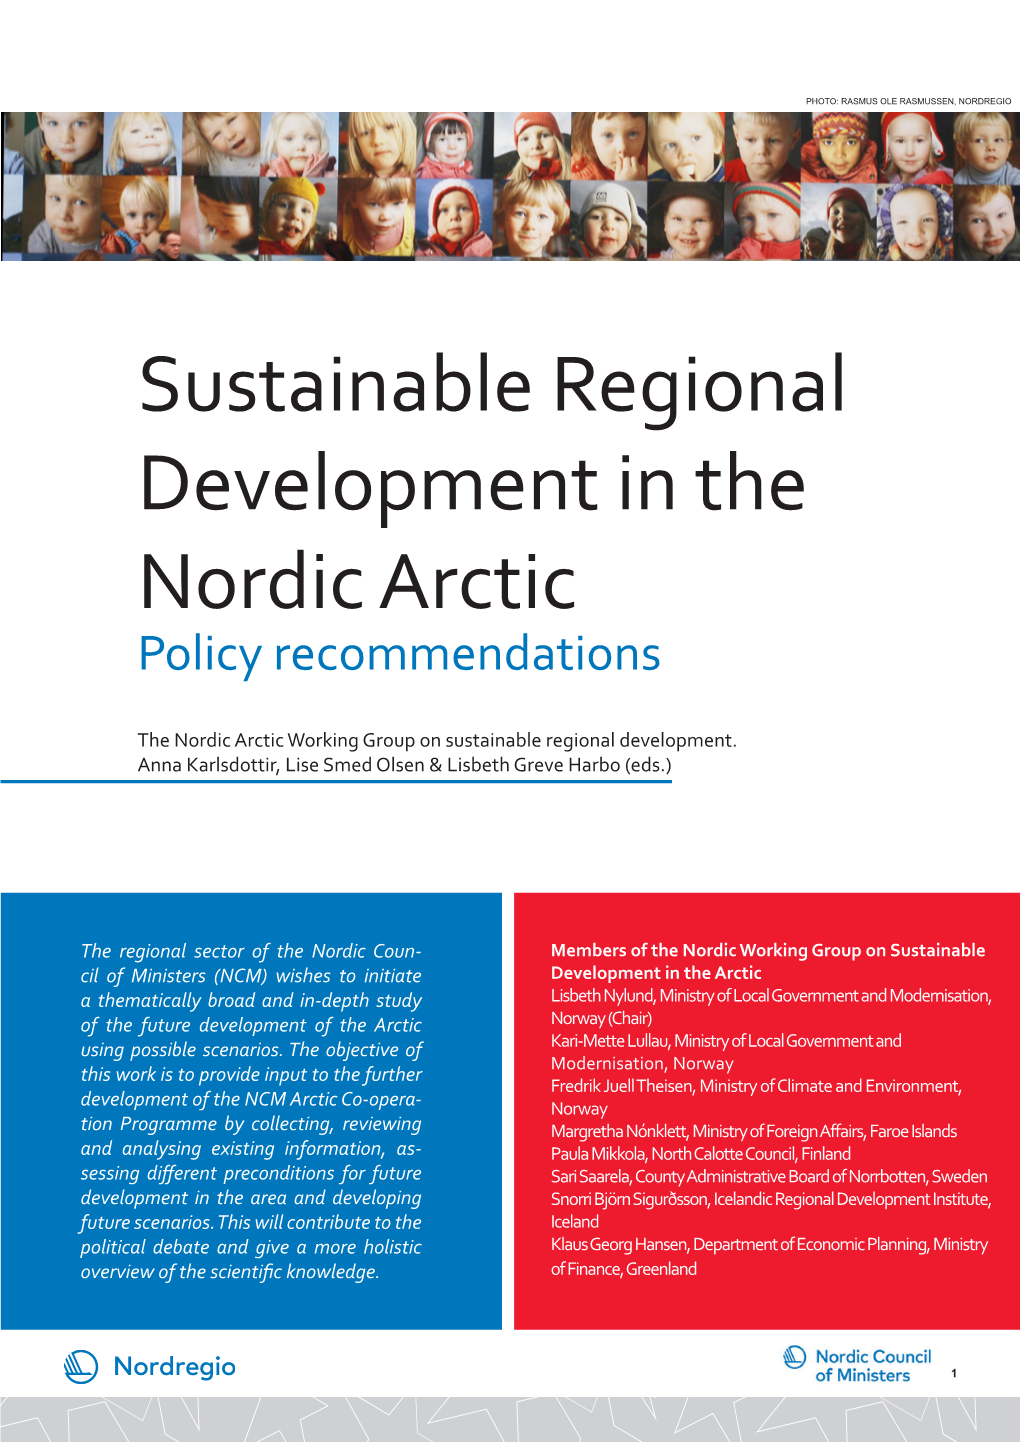 Sustainable Regional Development in the Nordic Arctic Policy Recommendations